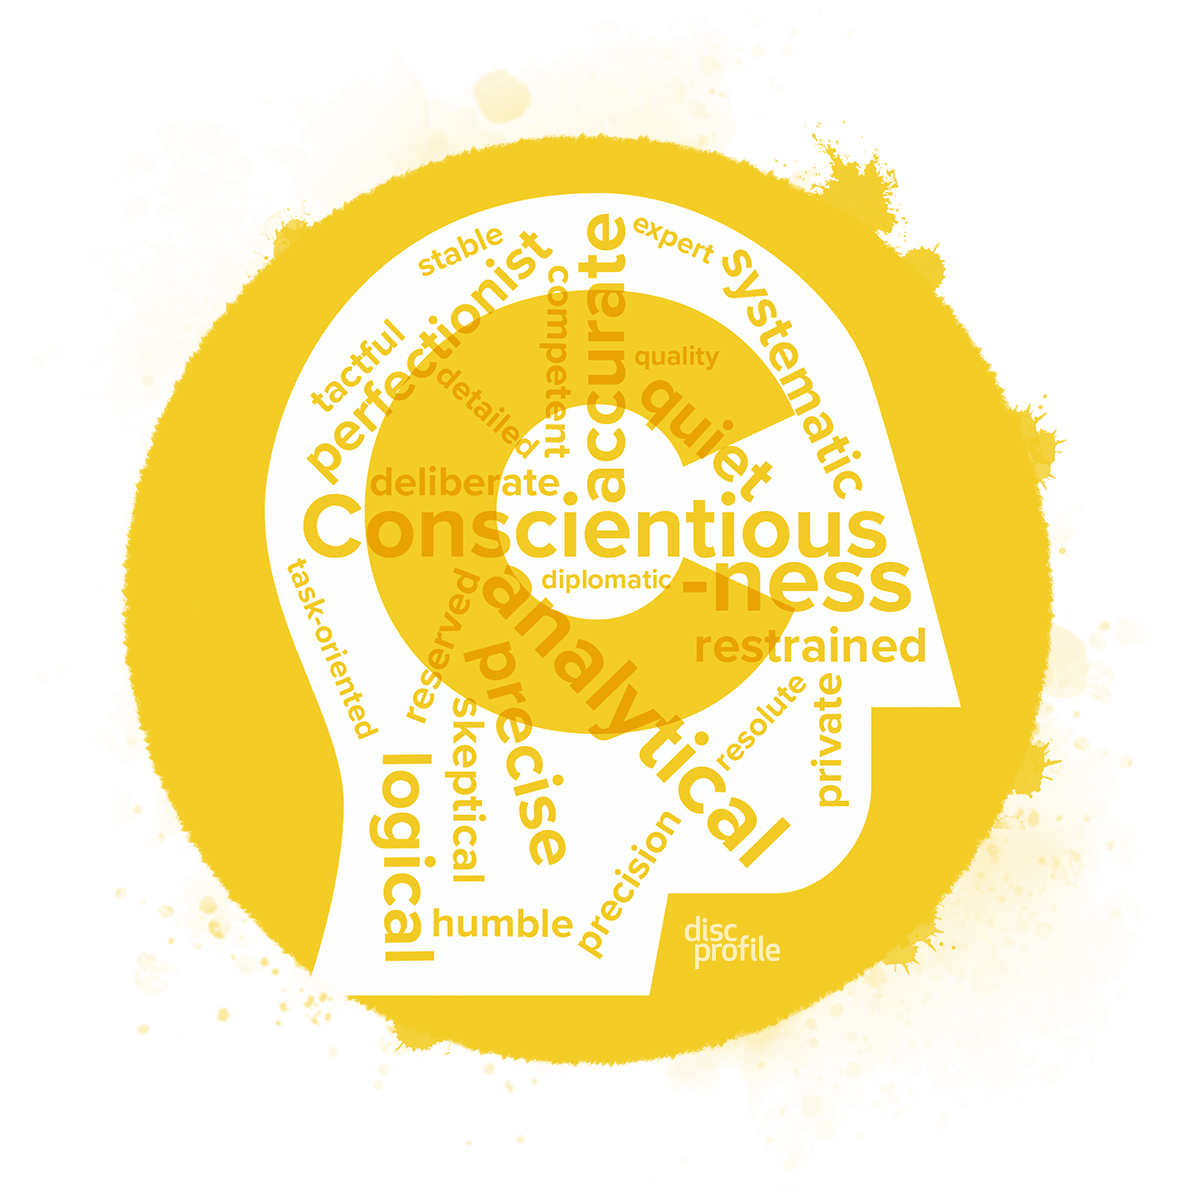 A C-style word cloud in a silhouette of a person’s head